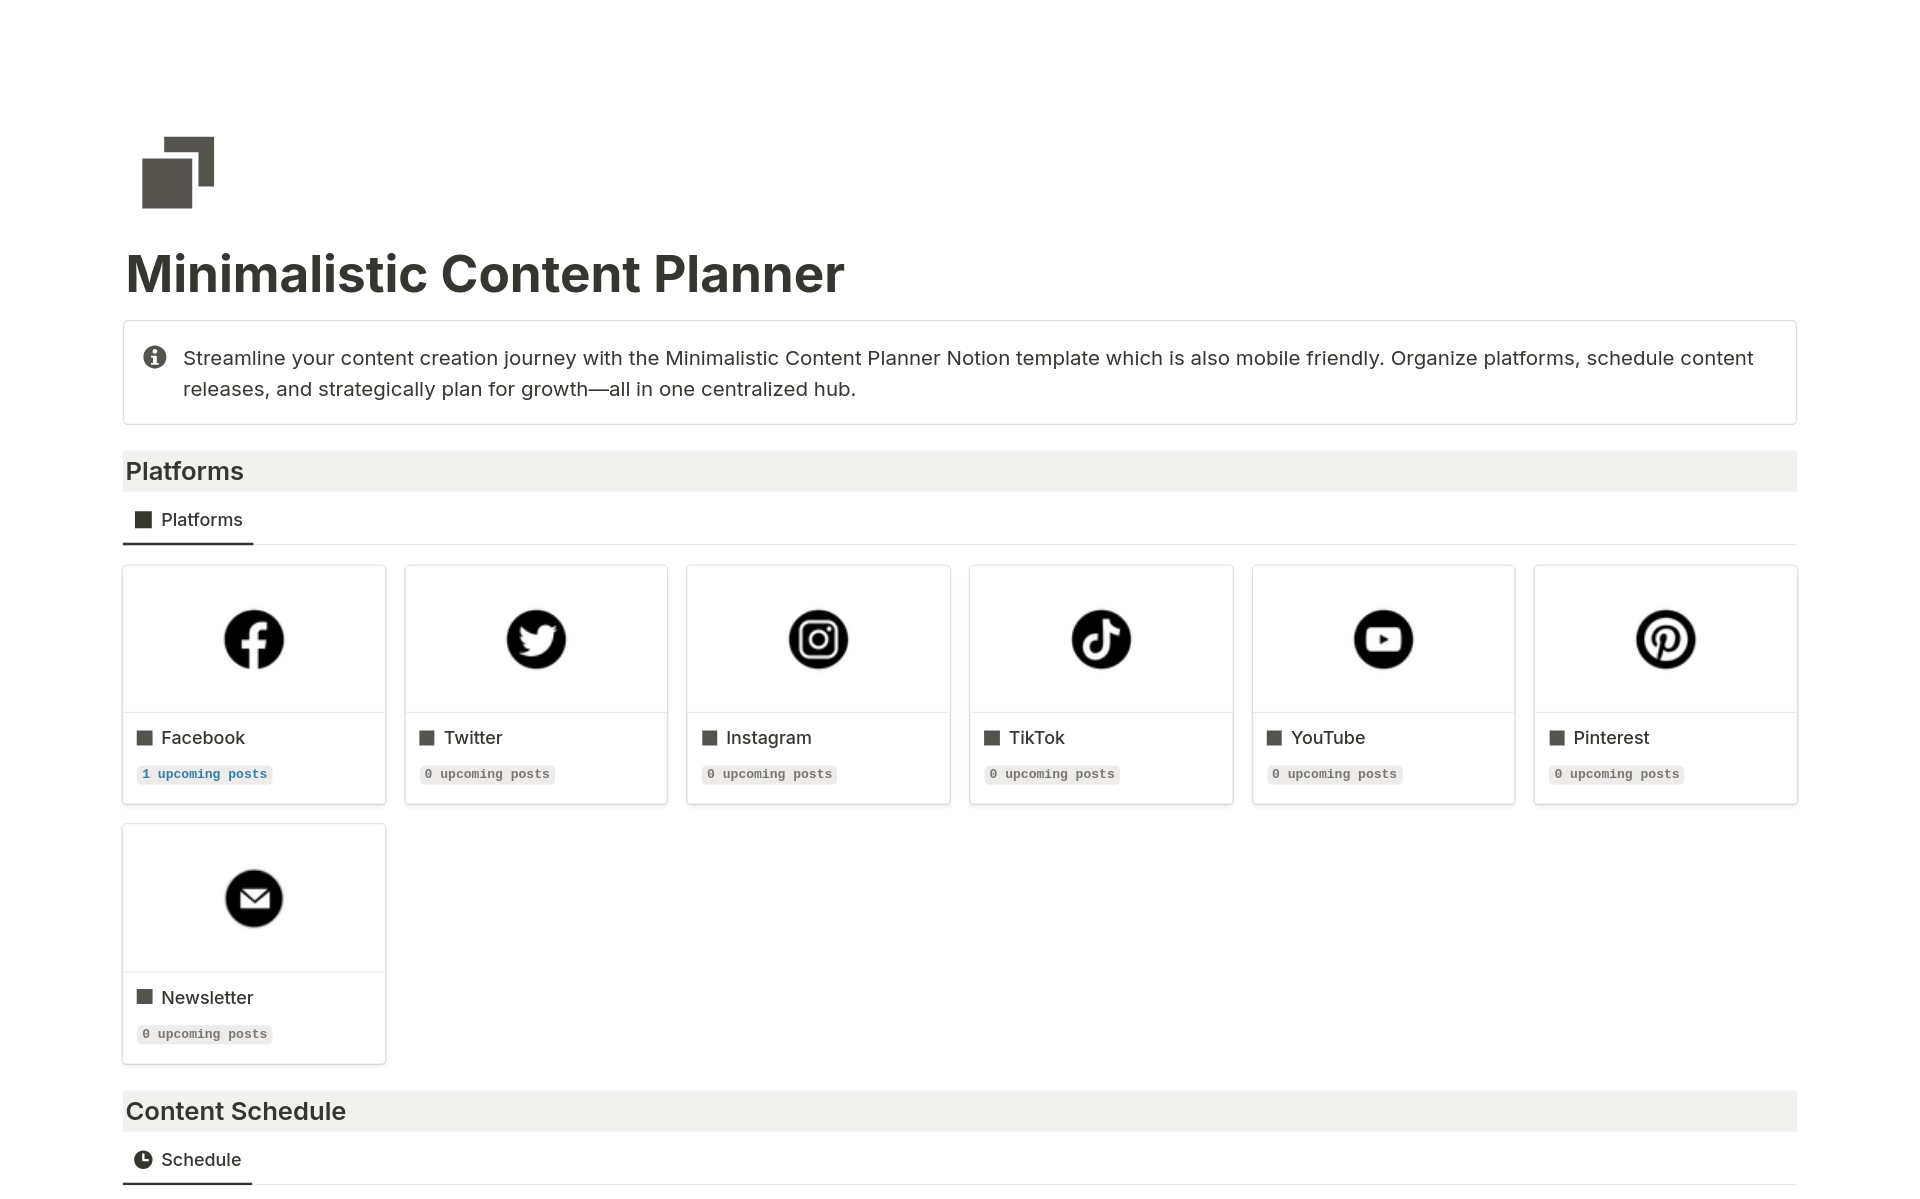 Streamline your content creation journey with the Minimalistic Content Planner Notion template which is also mobile friendly. Organize platforms, schedule content releases, and strategically plan for growth—all in one centralized hub. 